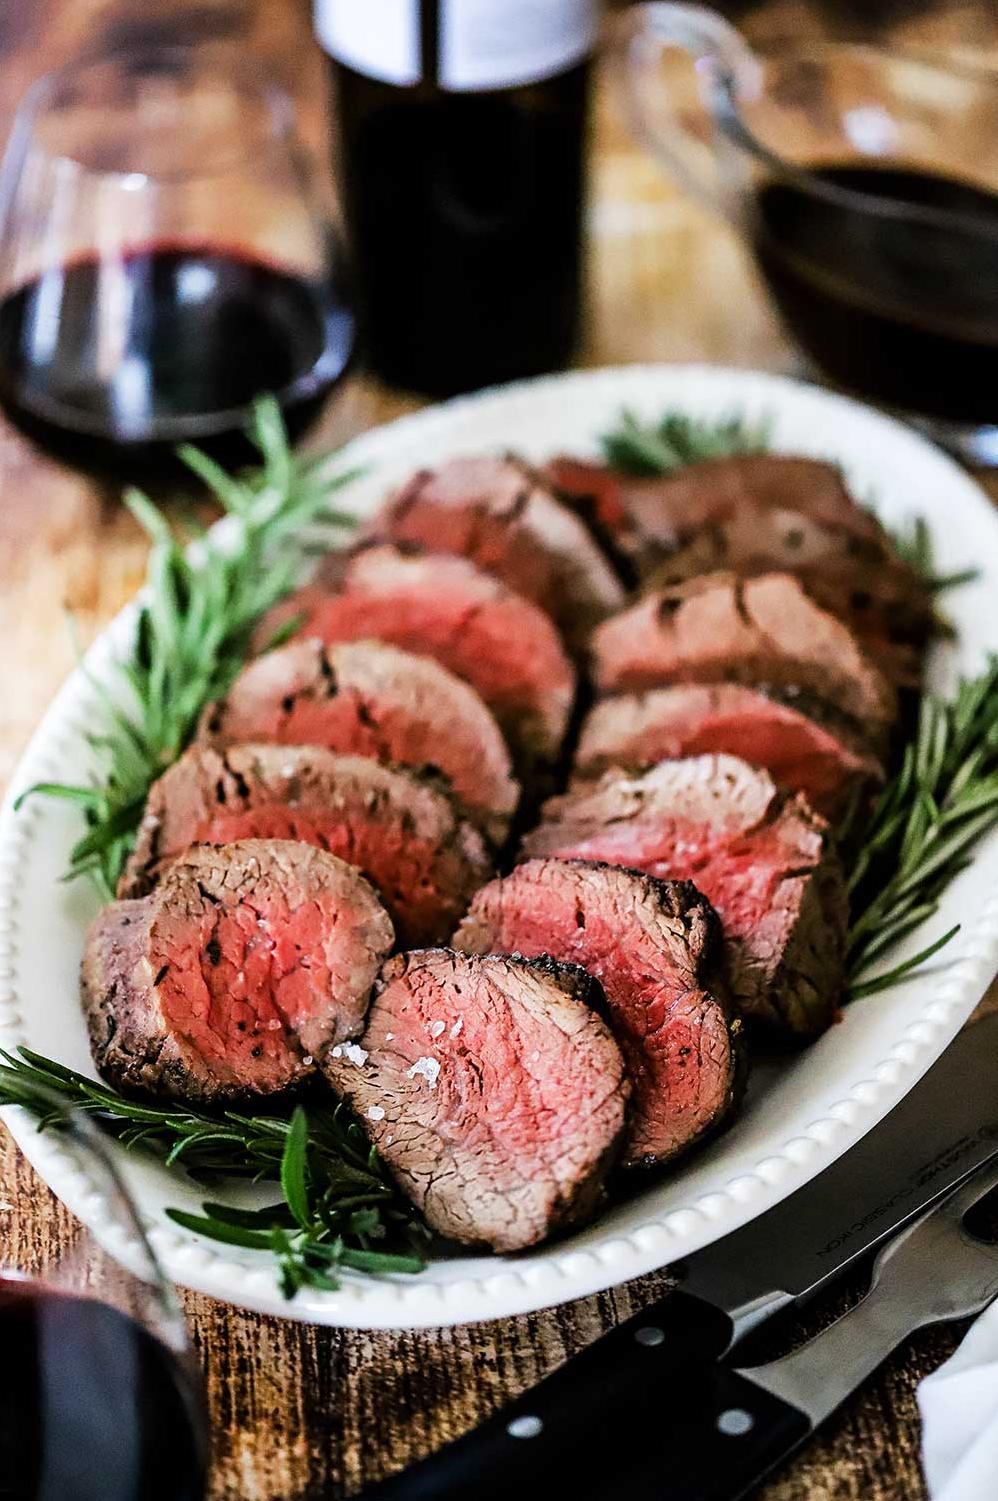  A hearty beef tenderloin drizzled with a rich Cabernet sauce